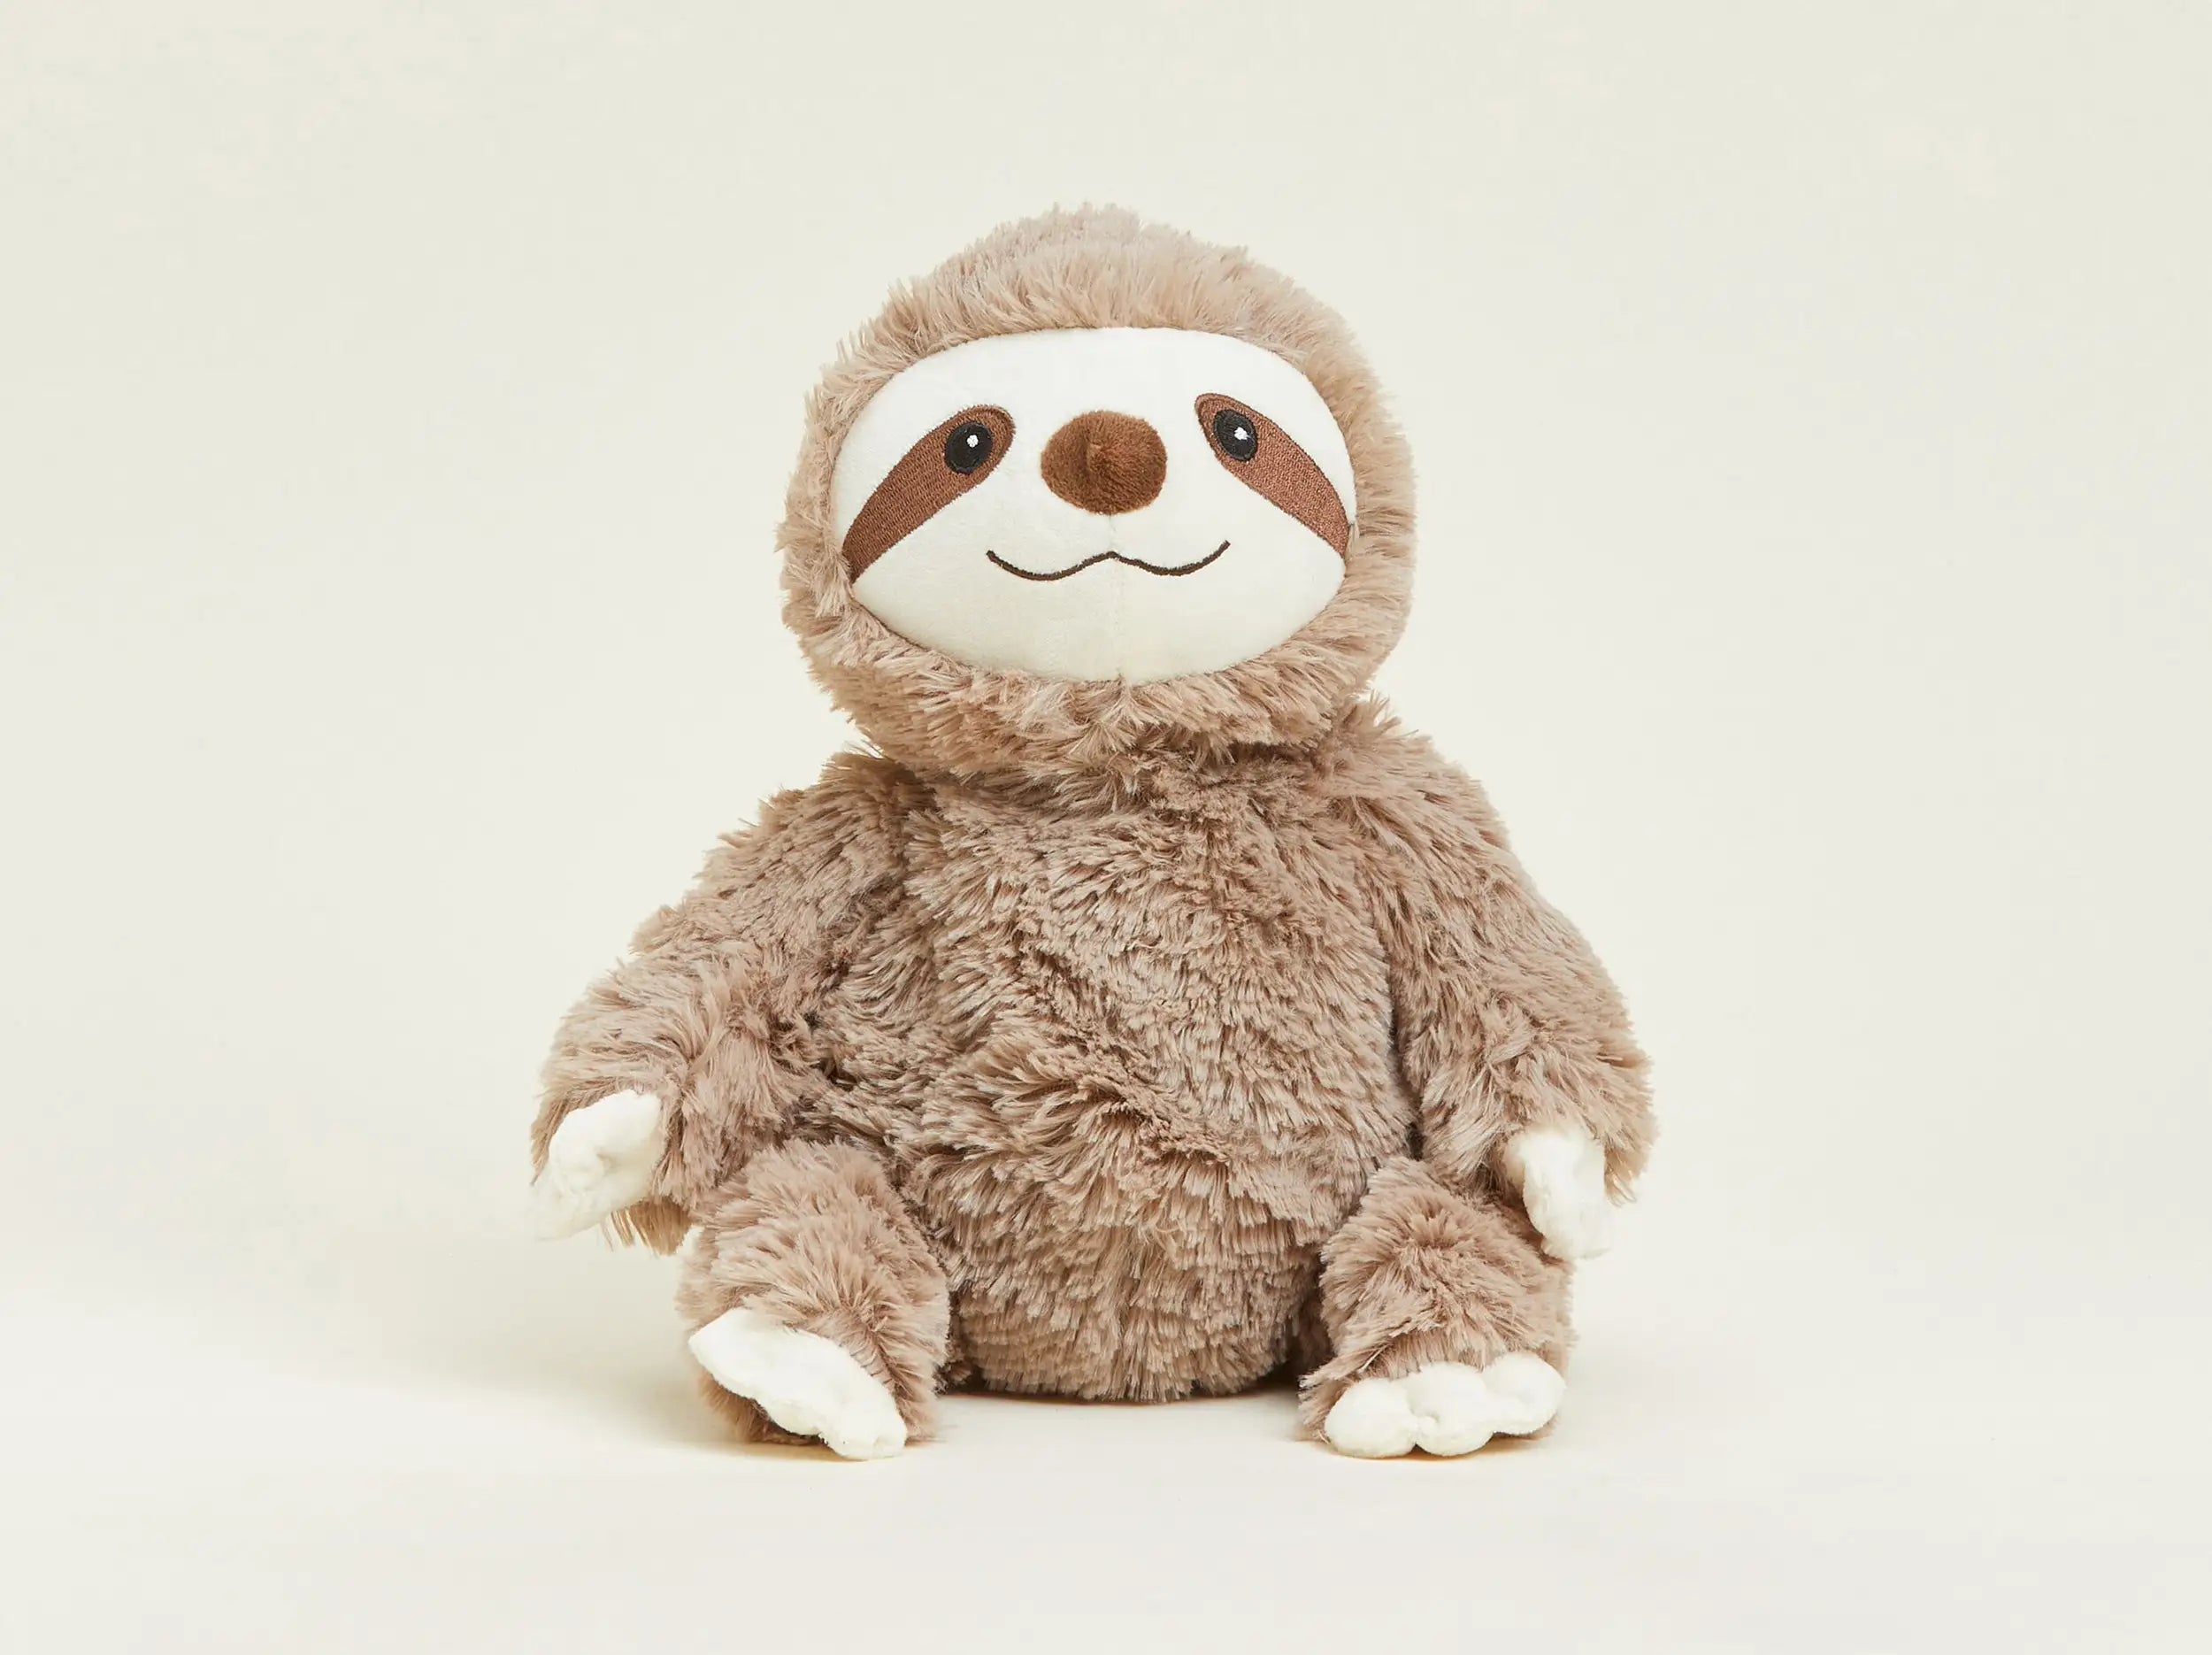 Soft & cuddly, heatable stuffed animals for your entire family